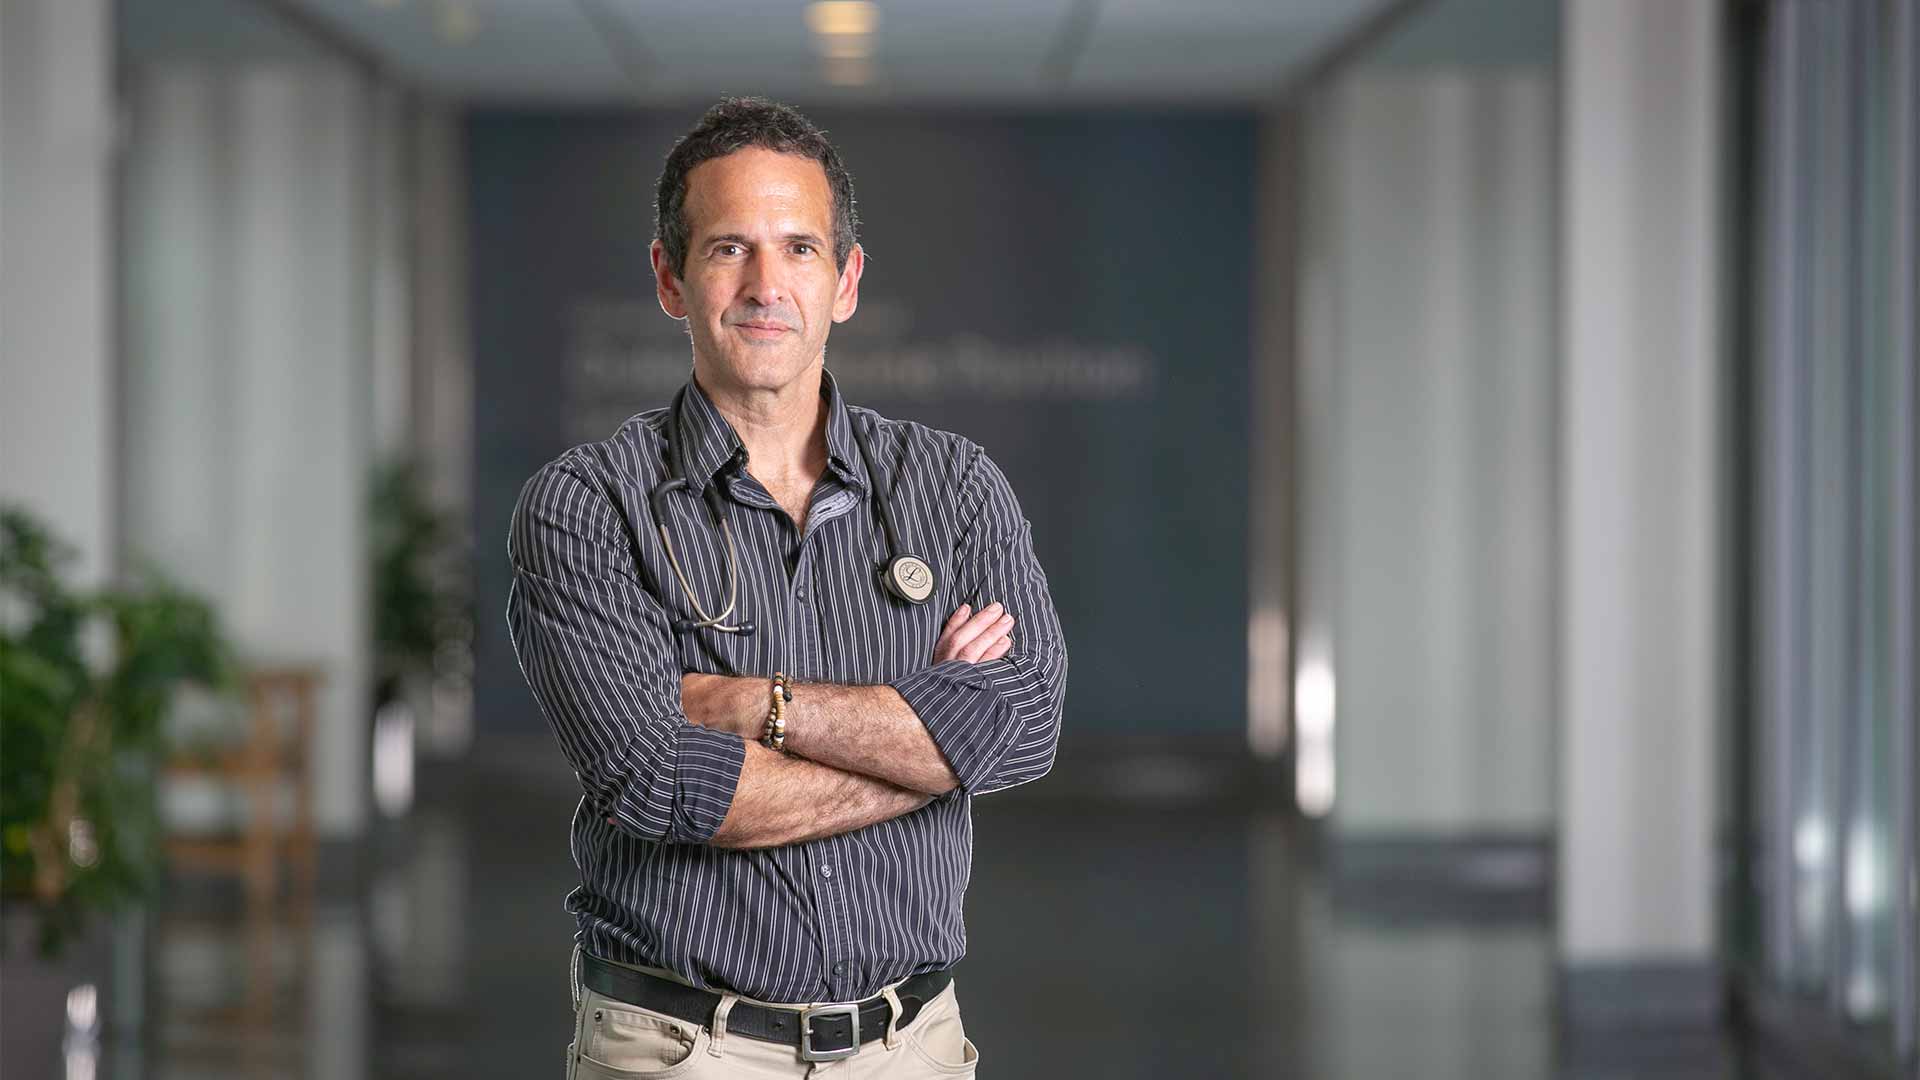 Duke pediatric oncologist Ray Barfield poses for a photo in the Duke Medicine Pavilion. Barfield's new program seeks to prevent doctor burnout – and reshape pre-medical education.